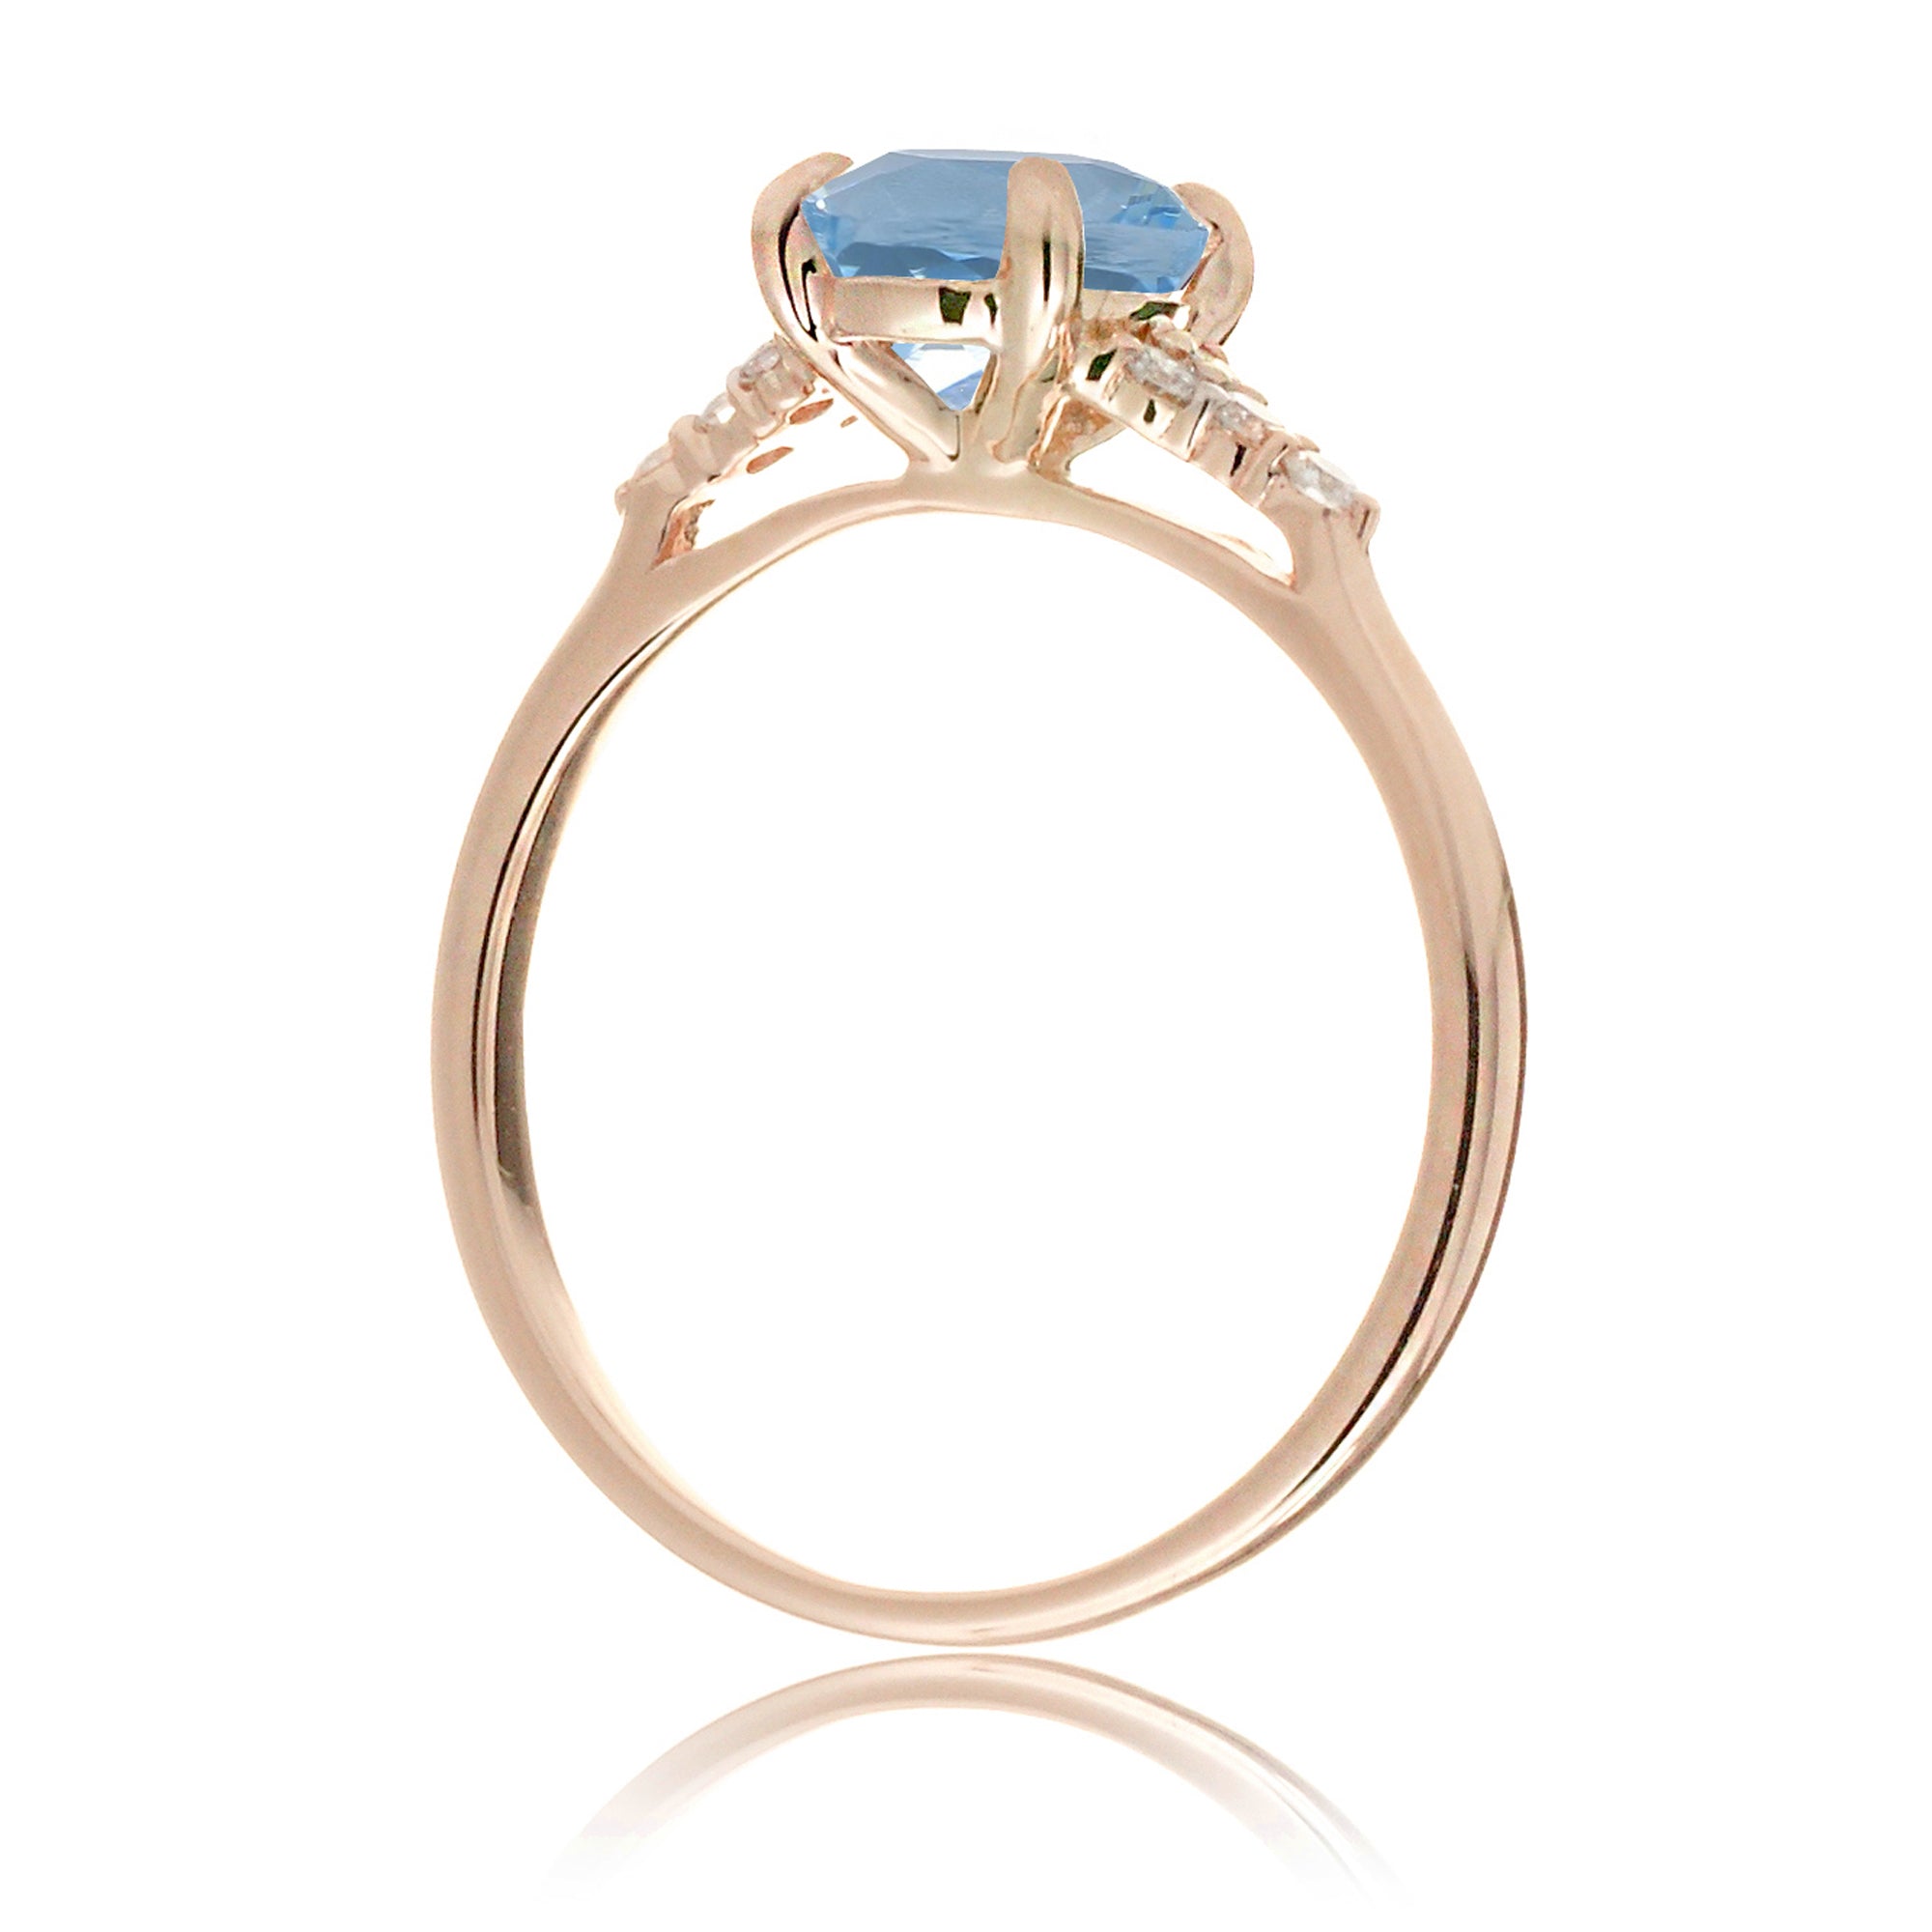 Pear cut natural aquamarine and diamond engagement ring in rose gold - the Chloe